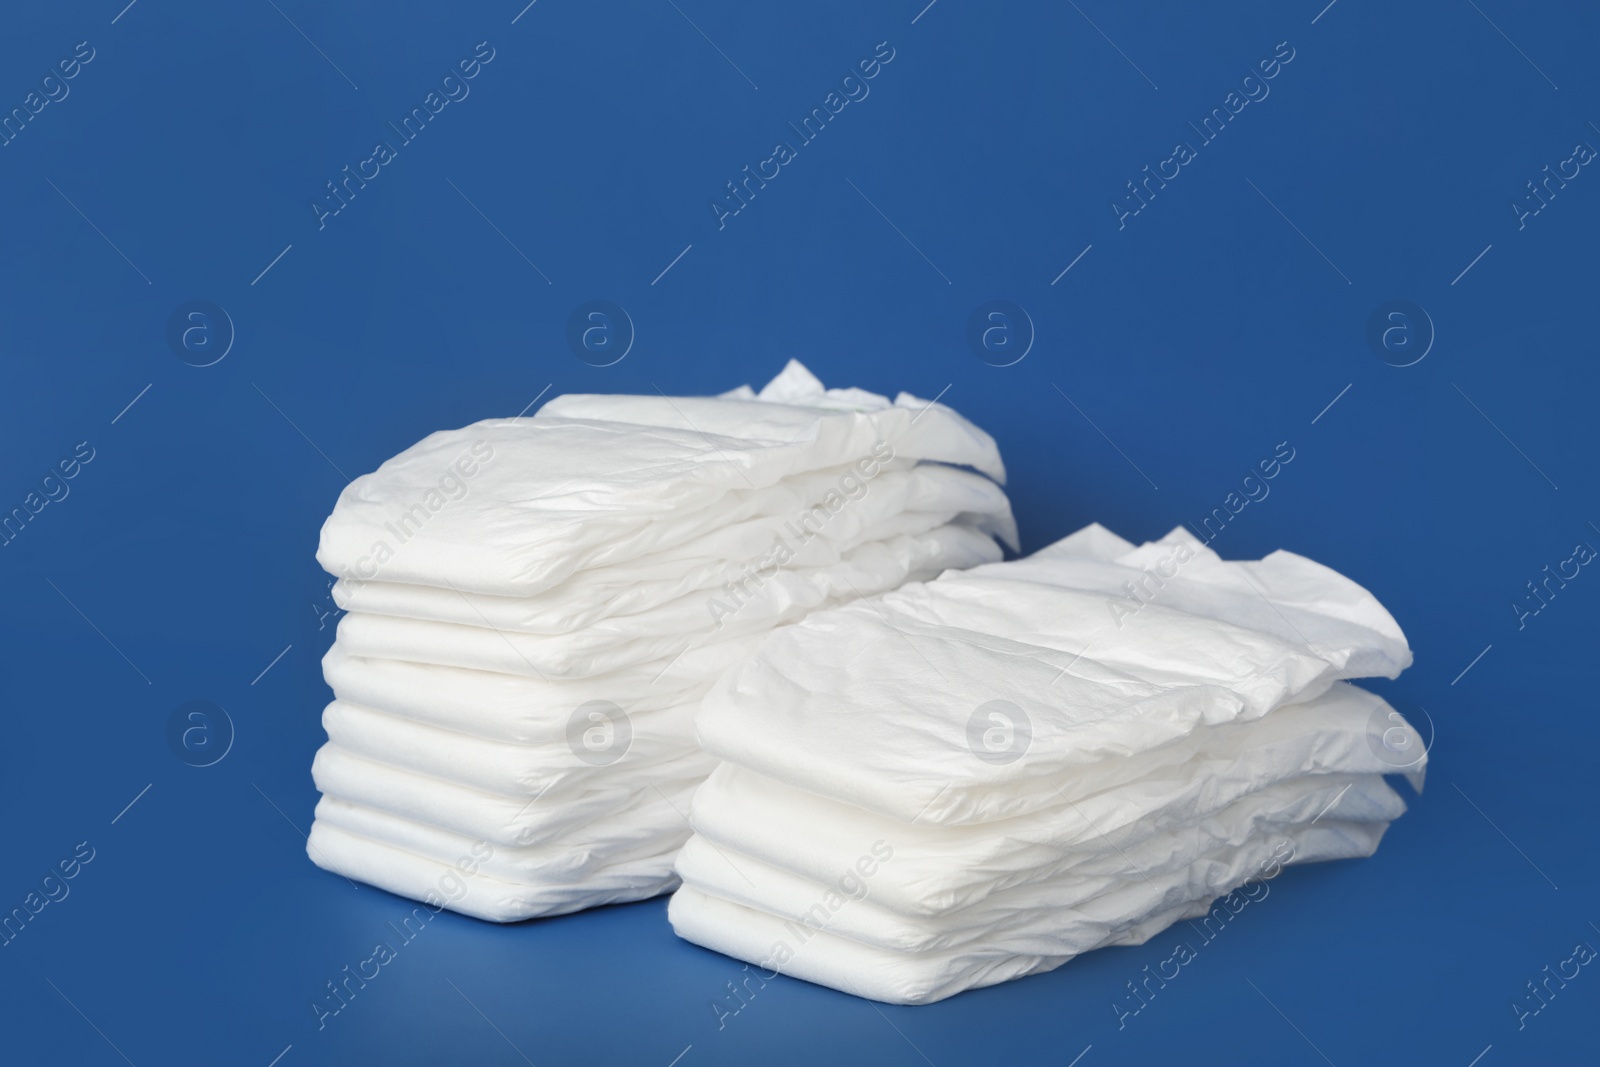 Photo of Stack of baby diapers on blue background